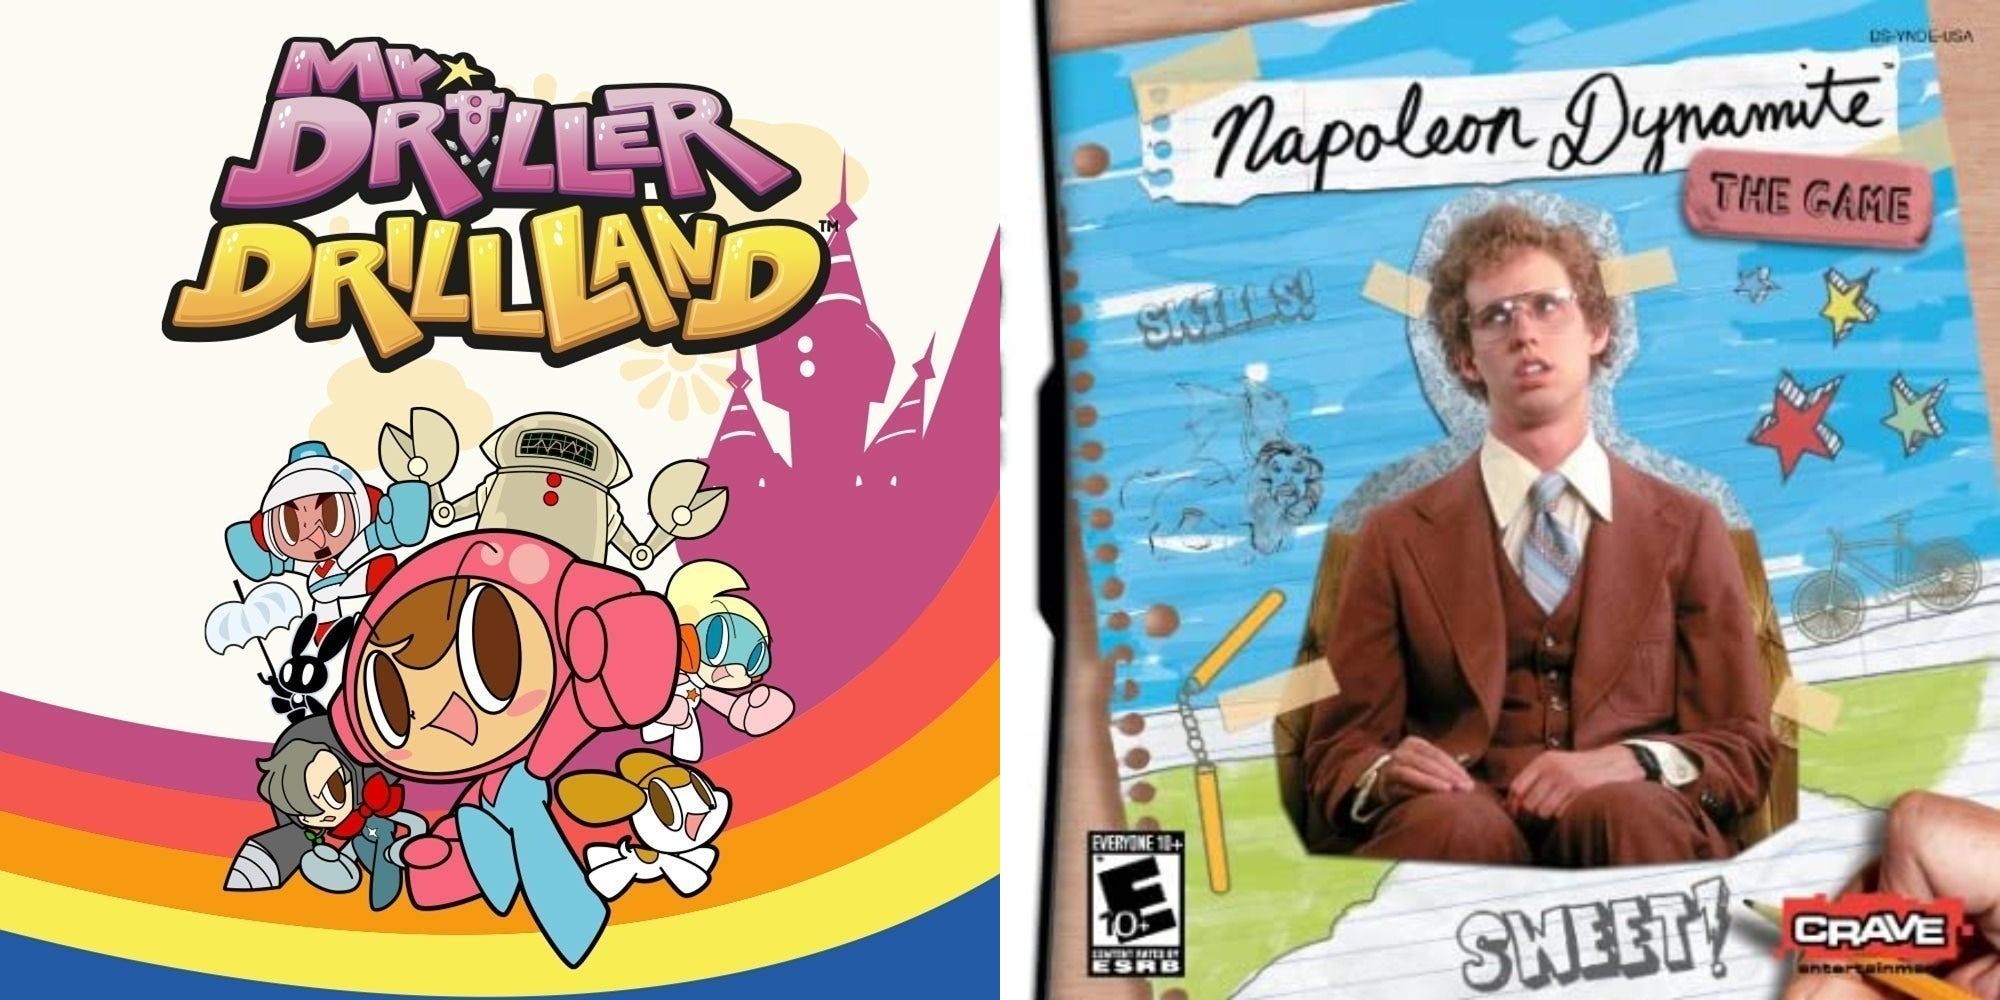 A split image of Mr Driller online and the front cover of the Napoleon Dynamite game